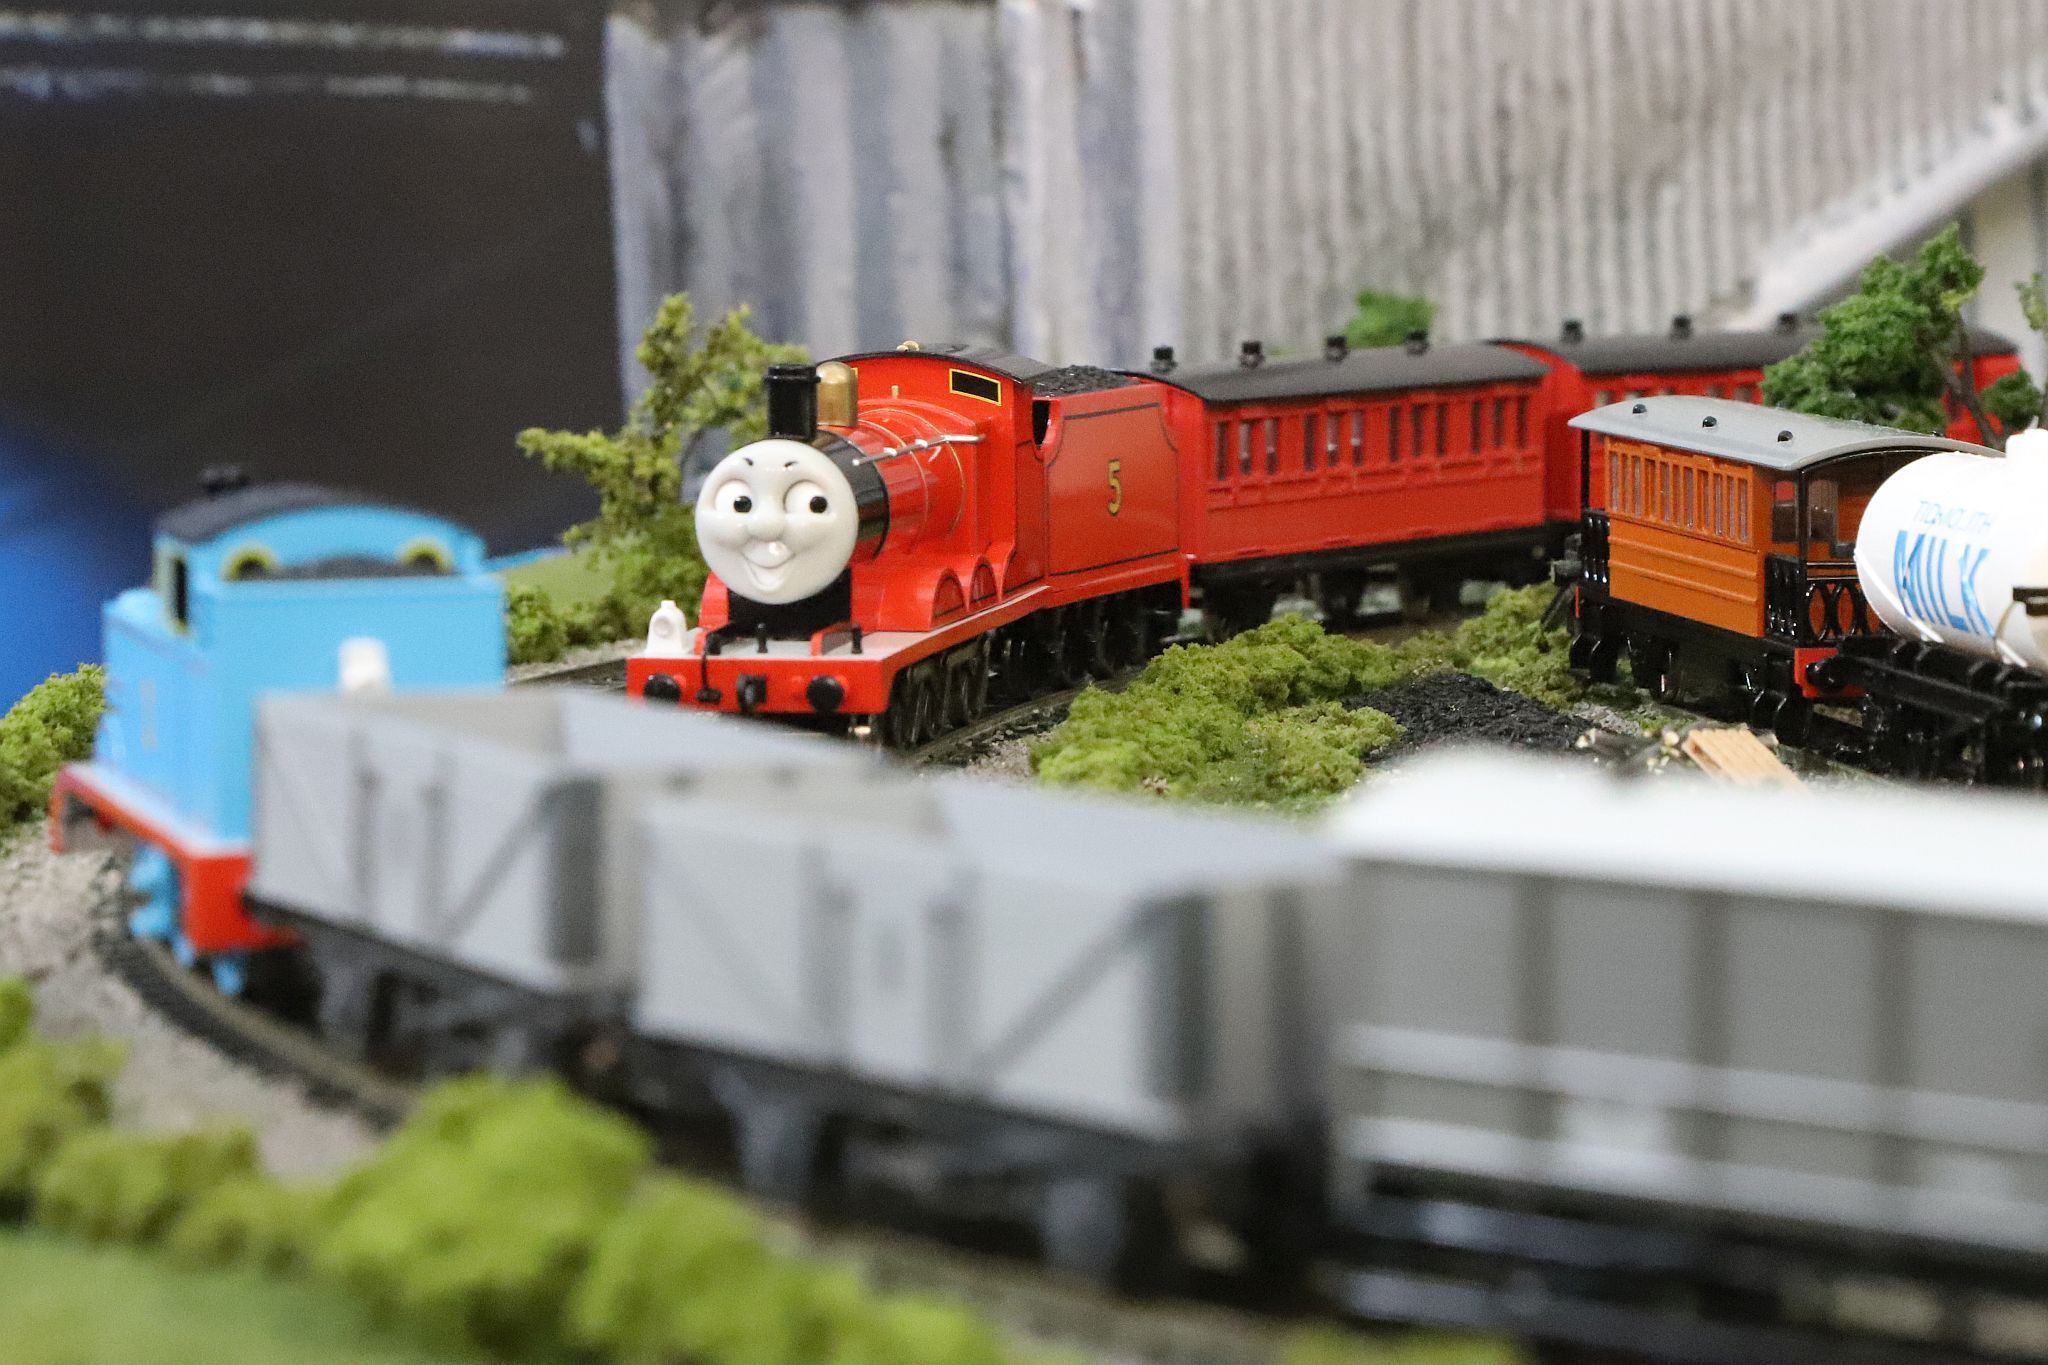 Thomas the Tank Engine and James the Red Engine OO Gauge model railway layout. 2023 London Festival of Railway Modelling, Alexandra Palace, London